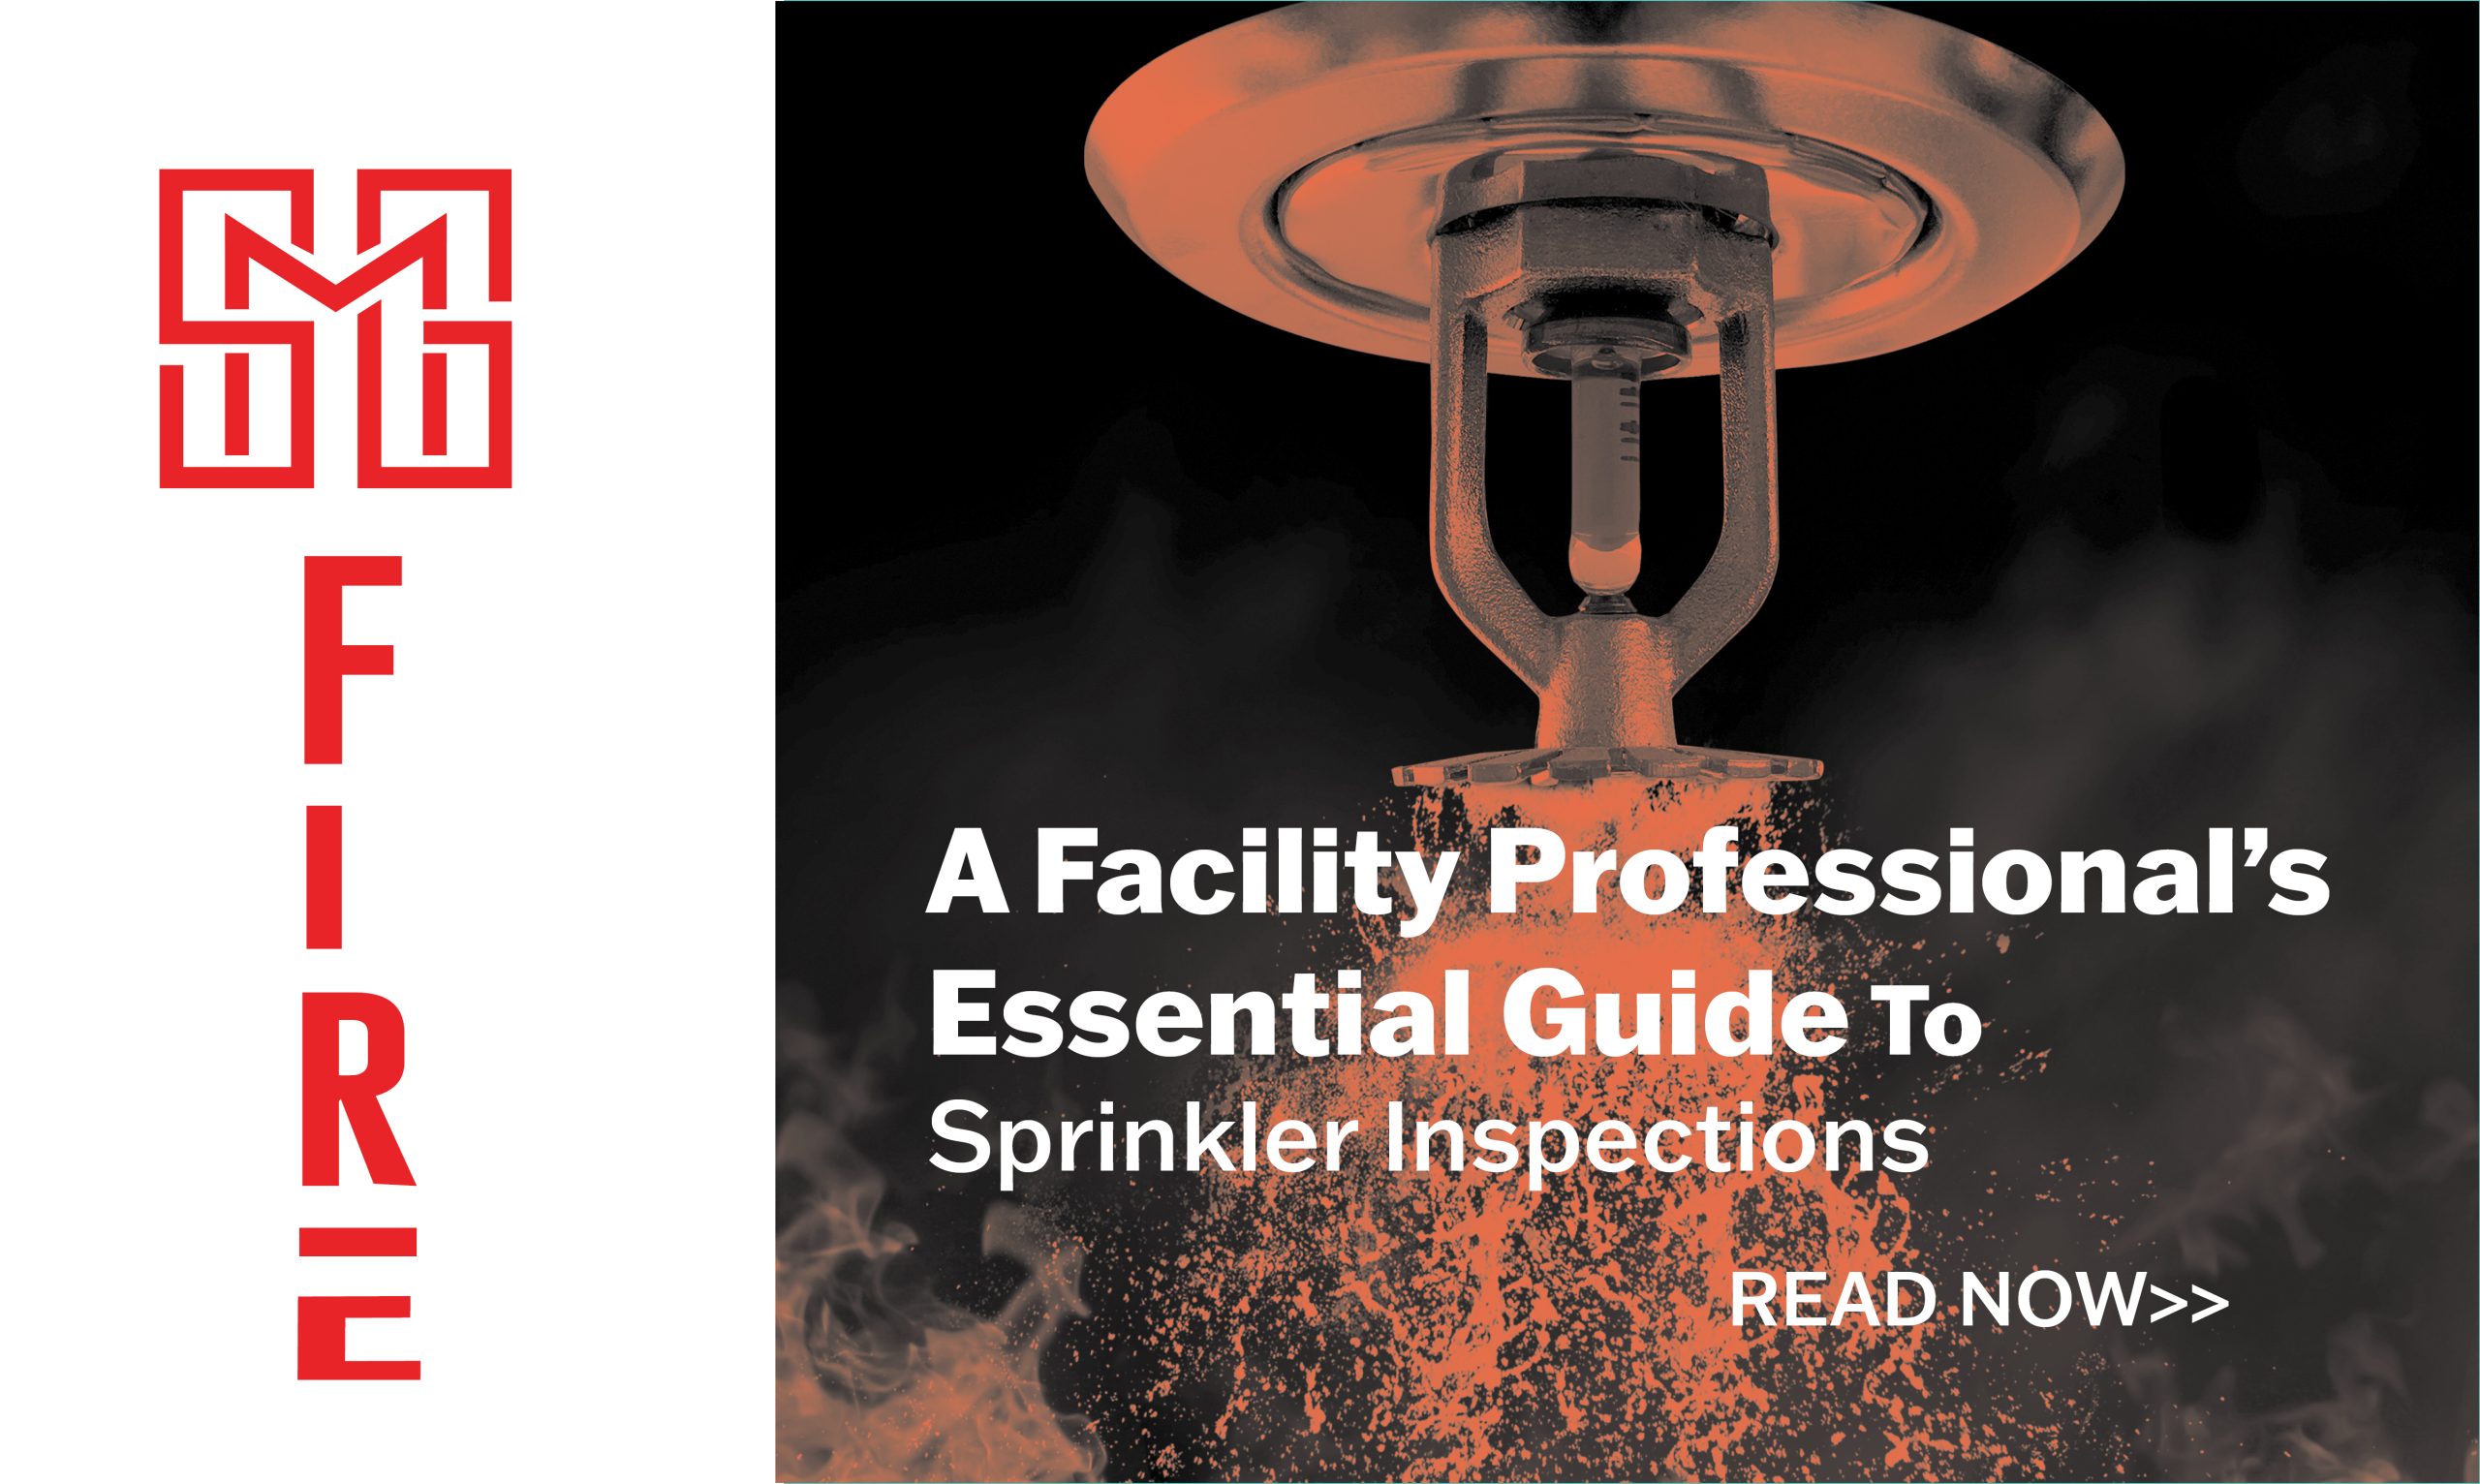 A Facility Professional's Essential Guide to Fire Sprinkler Inspections